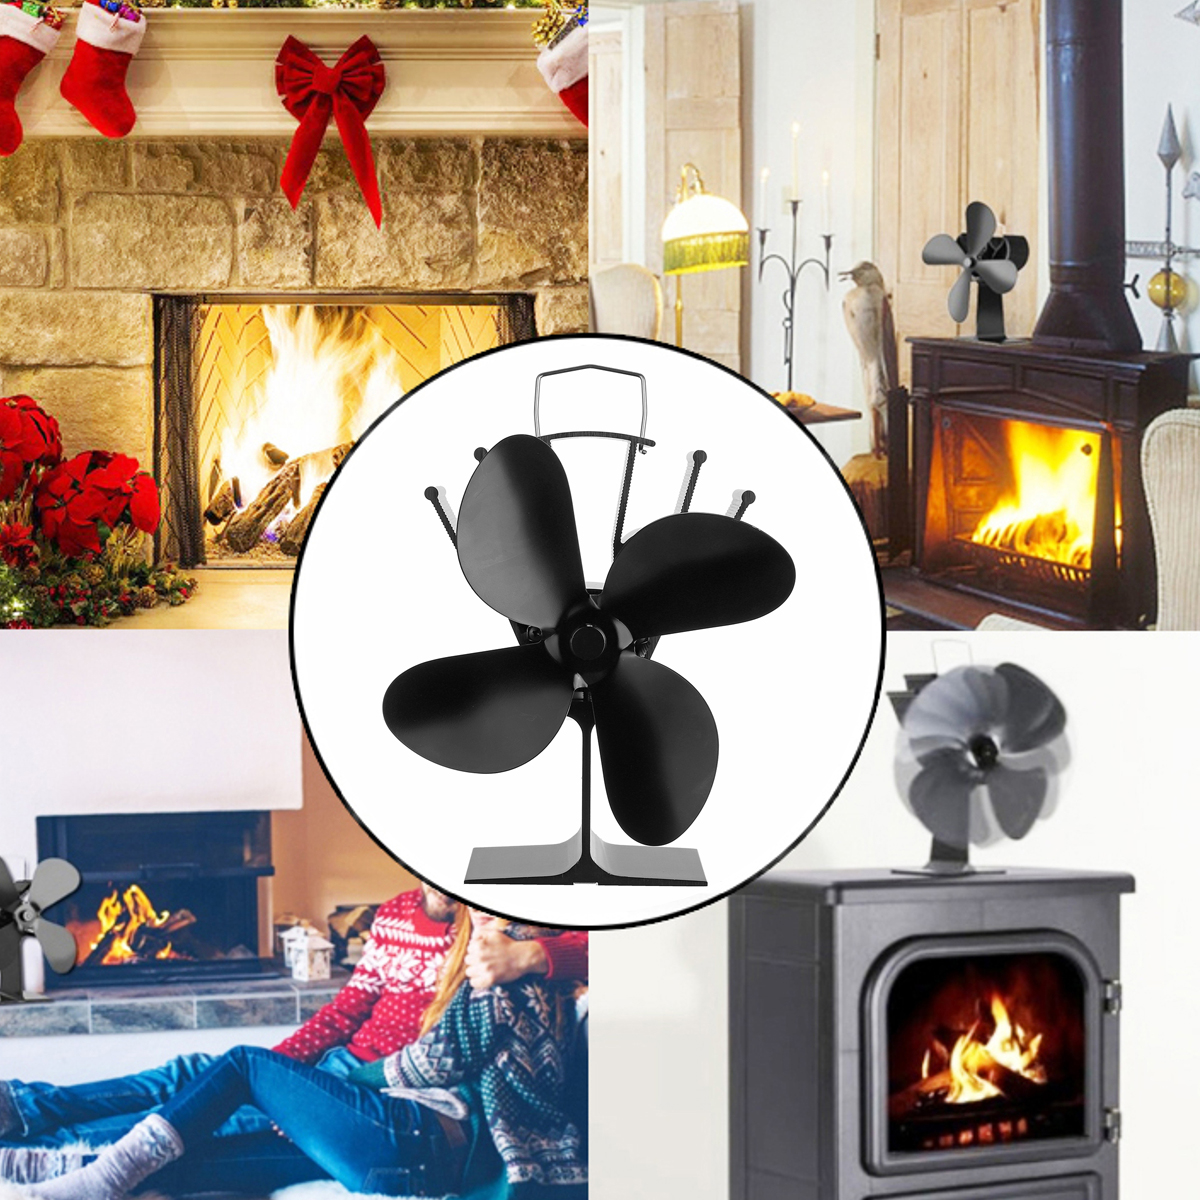 4-and-5-Blade-Heat-Self-Power-Wood-Stove-Fan-Burner-Efficient-Fireplace-Silent-1735450-8